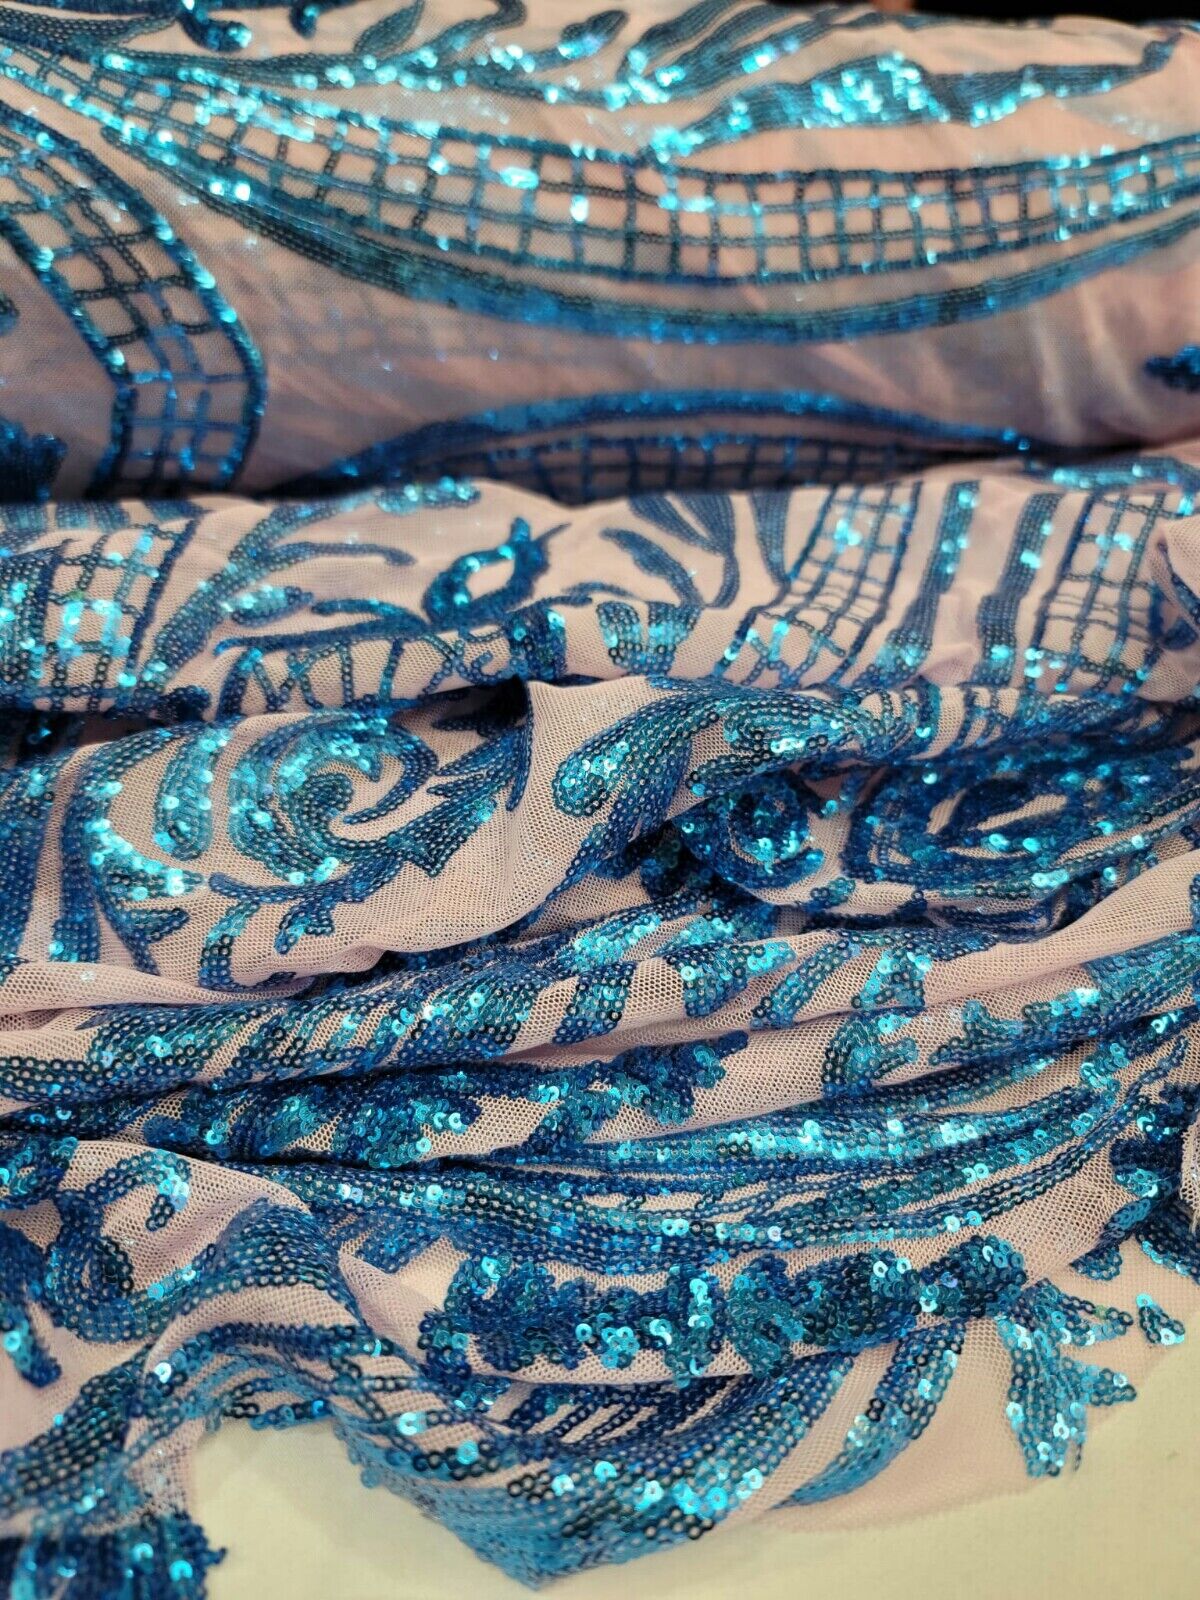 Royal Blue Sequin Lace Fabric By The Yard with Pink Four Way Stretch Mesh - Perfect for Prom and Bridal Wear